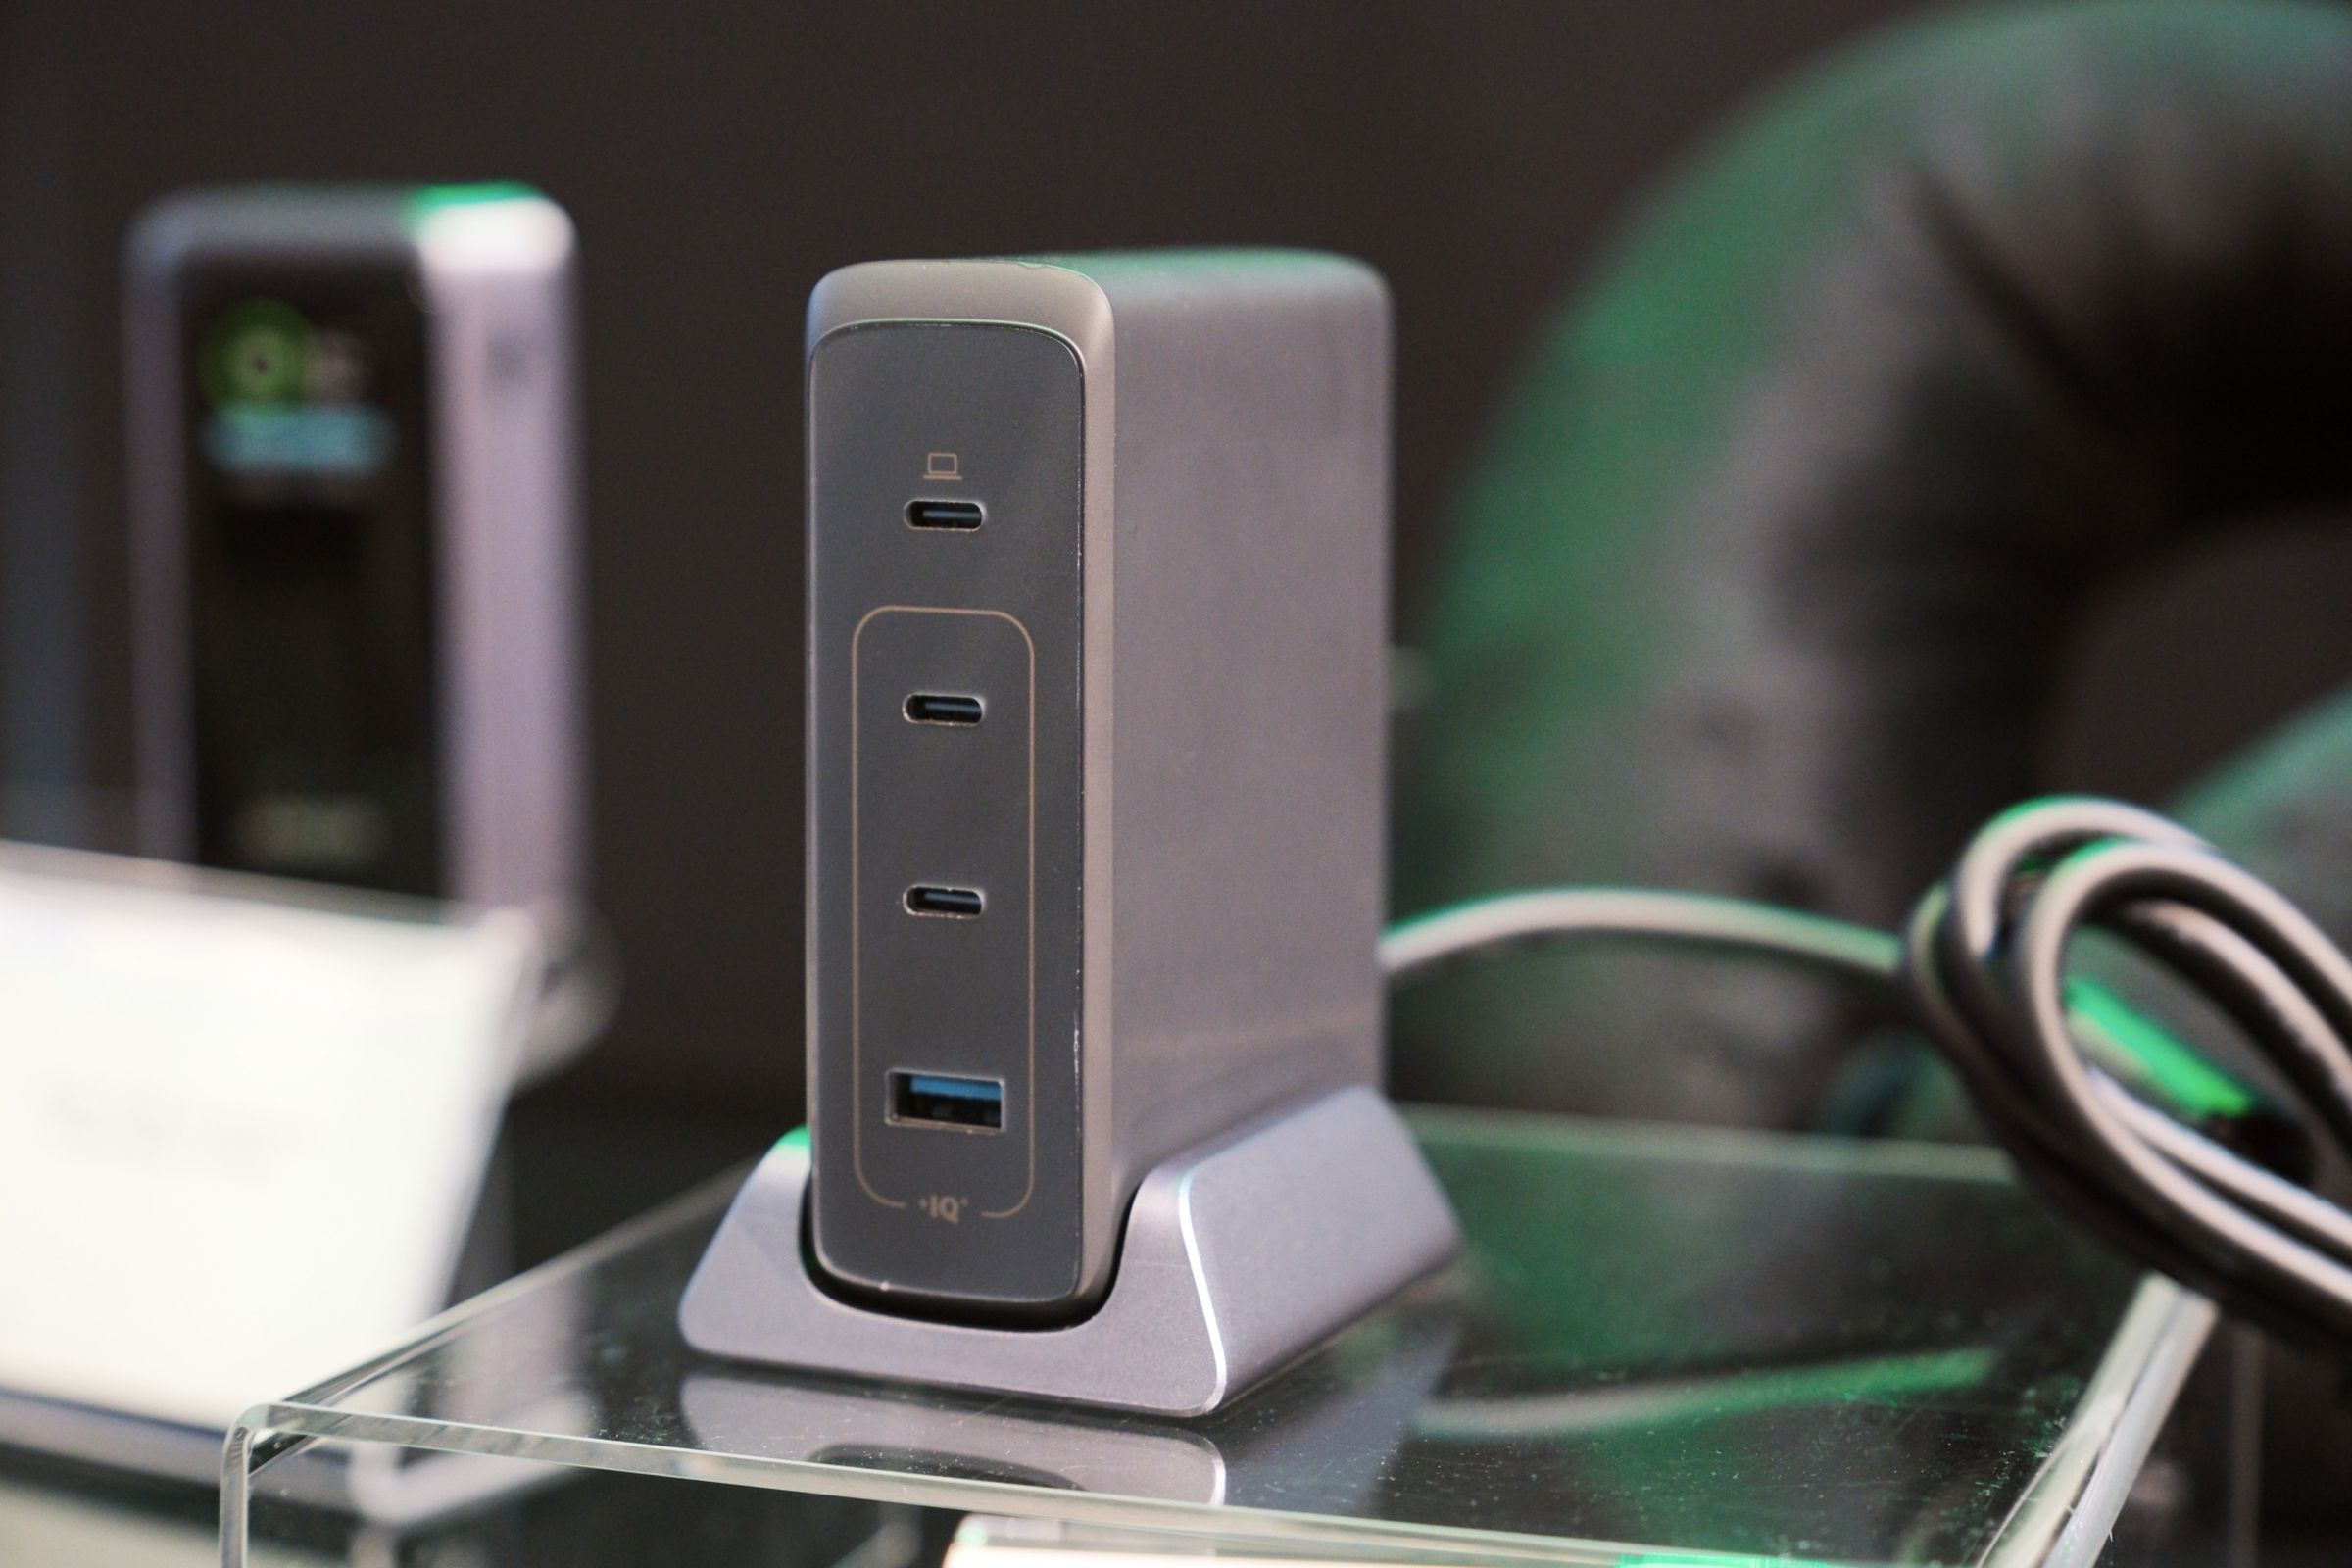 Charging brick with four USB ports standing vertically